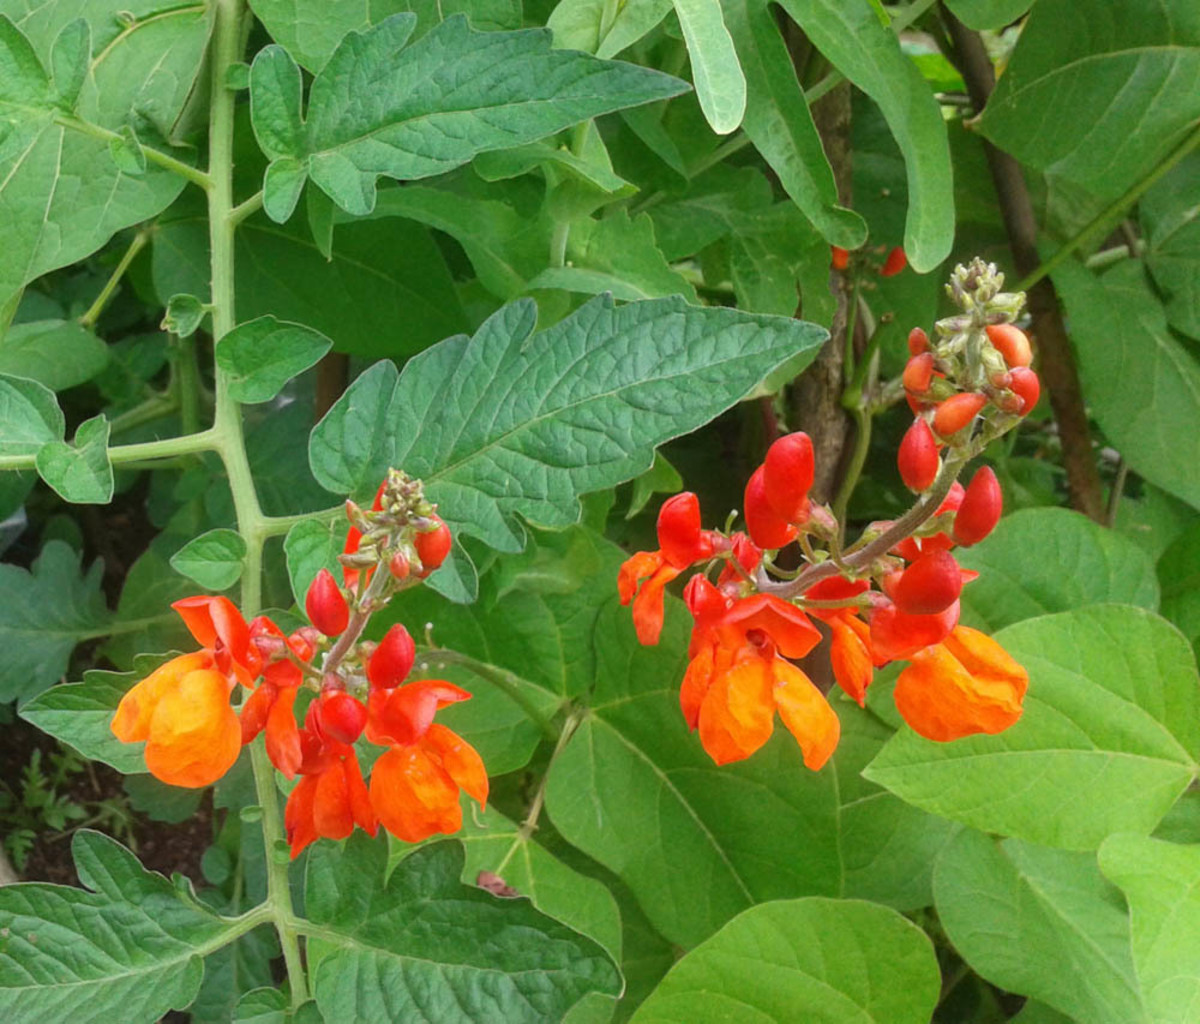 Runner Bean Flowers--Just Look at Those Spectacular Red Blossoms Close-up! 